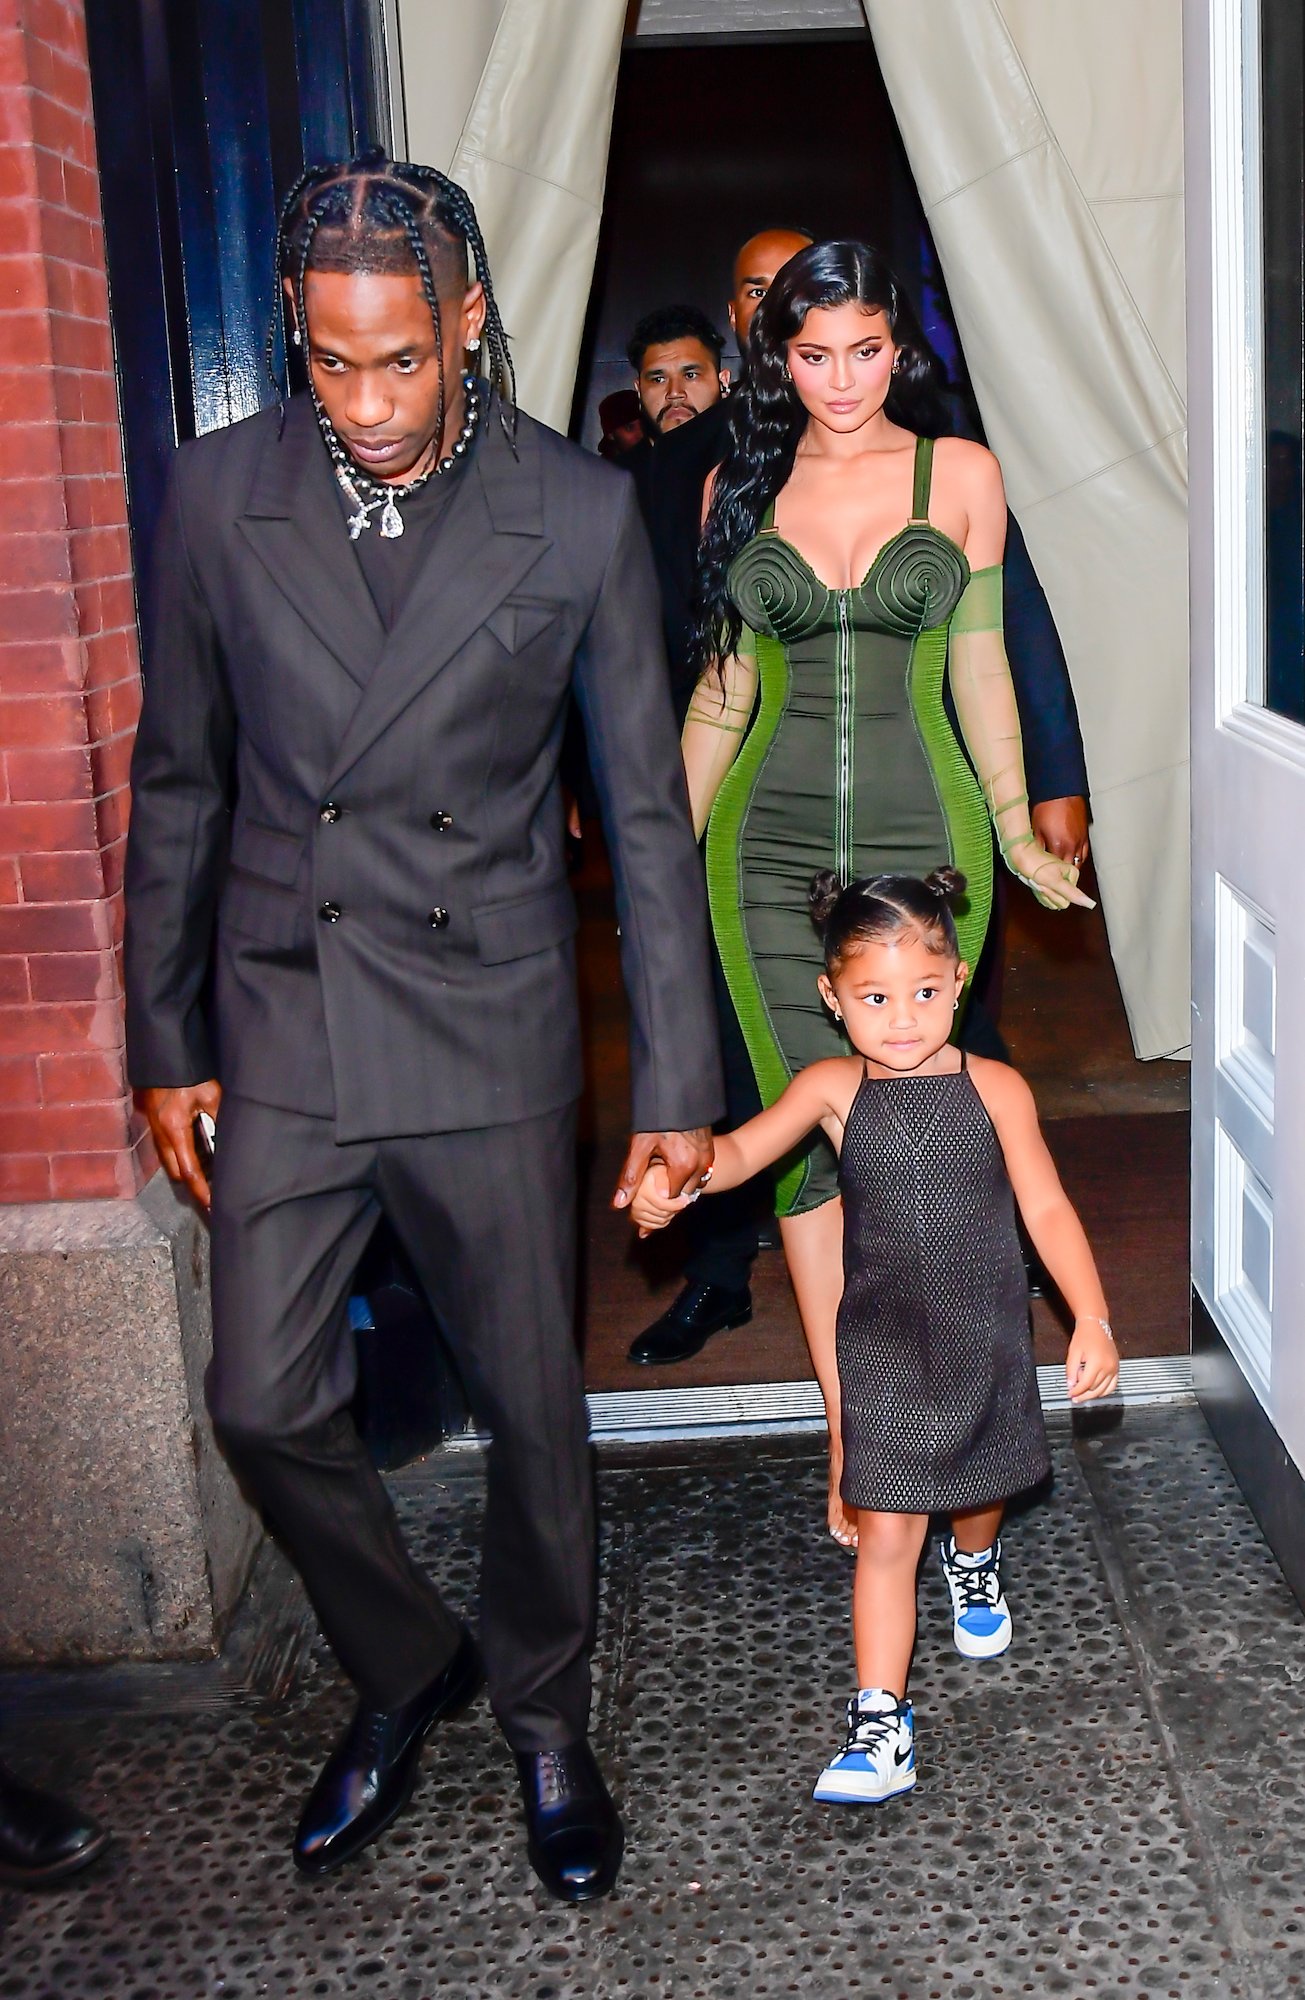 Travis Scott, Kylie Jenner, and their daughter Stormi Webster walking in New York City in June 2021